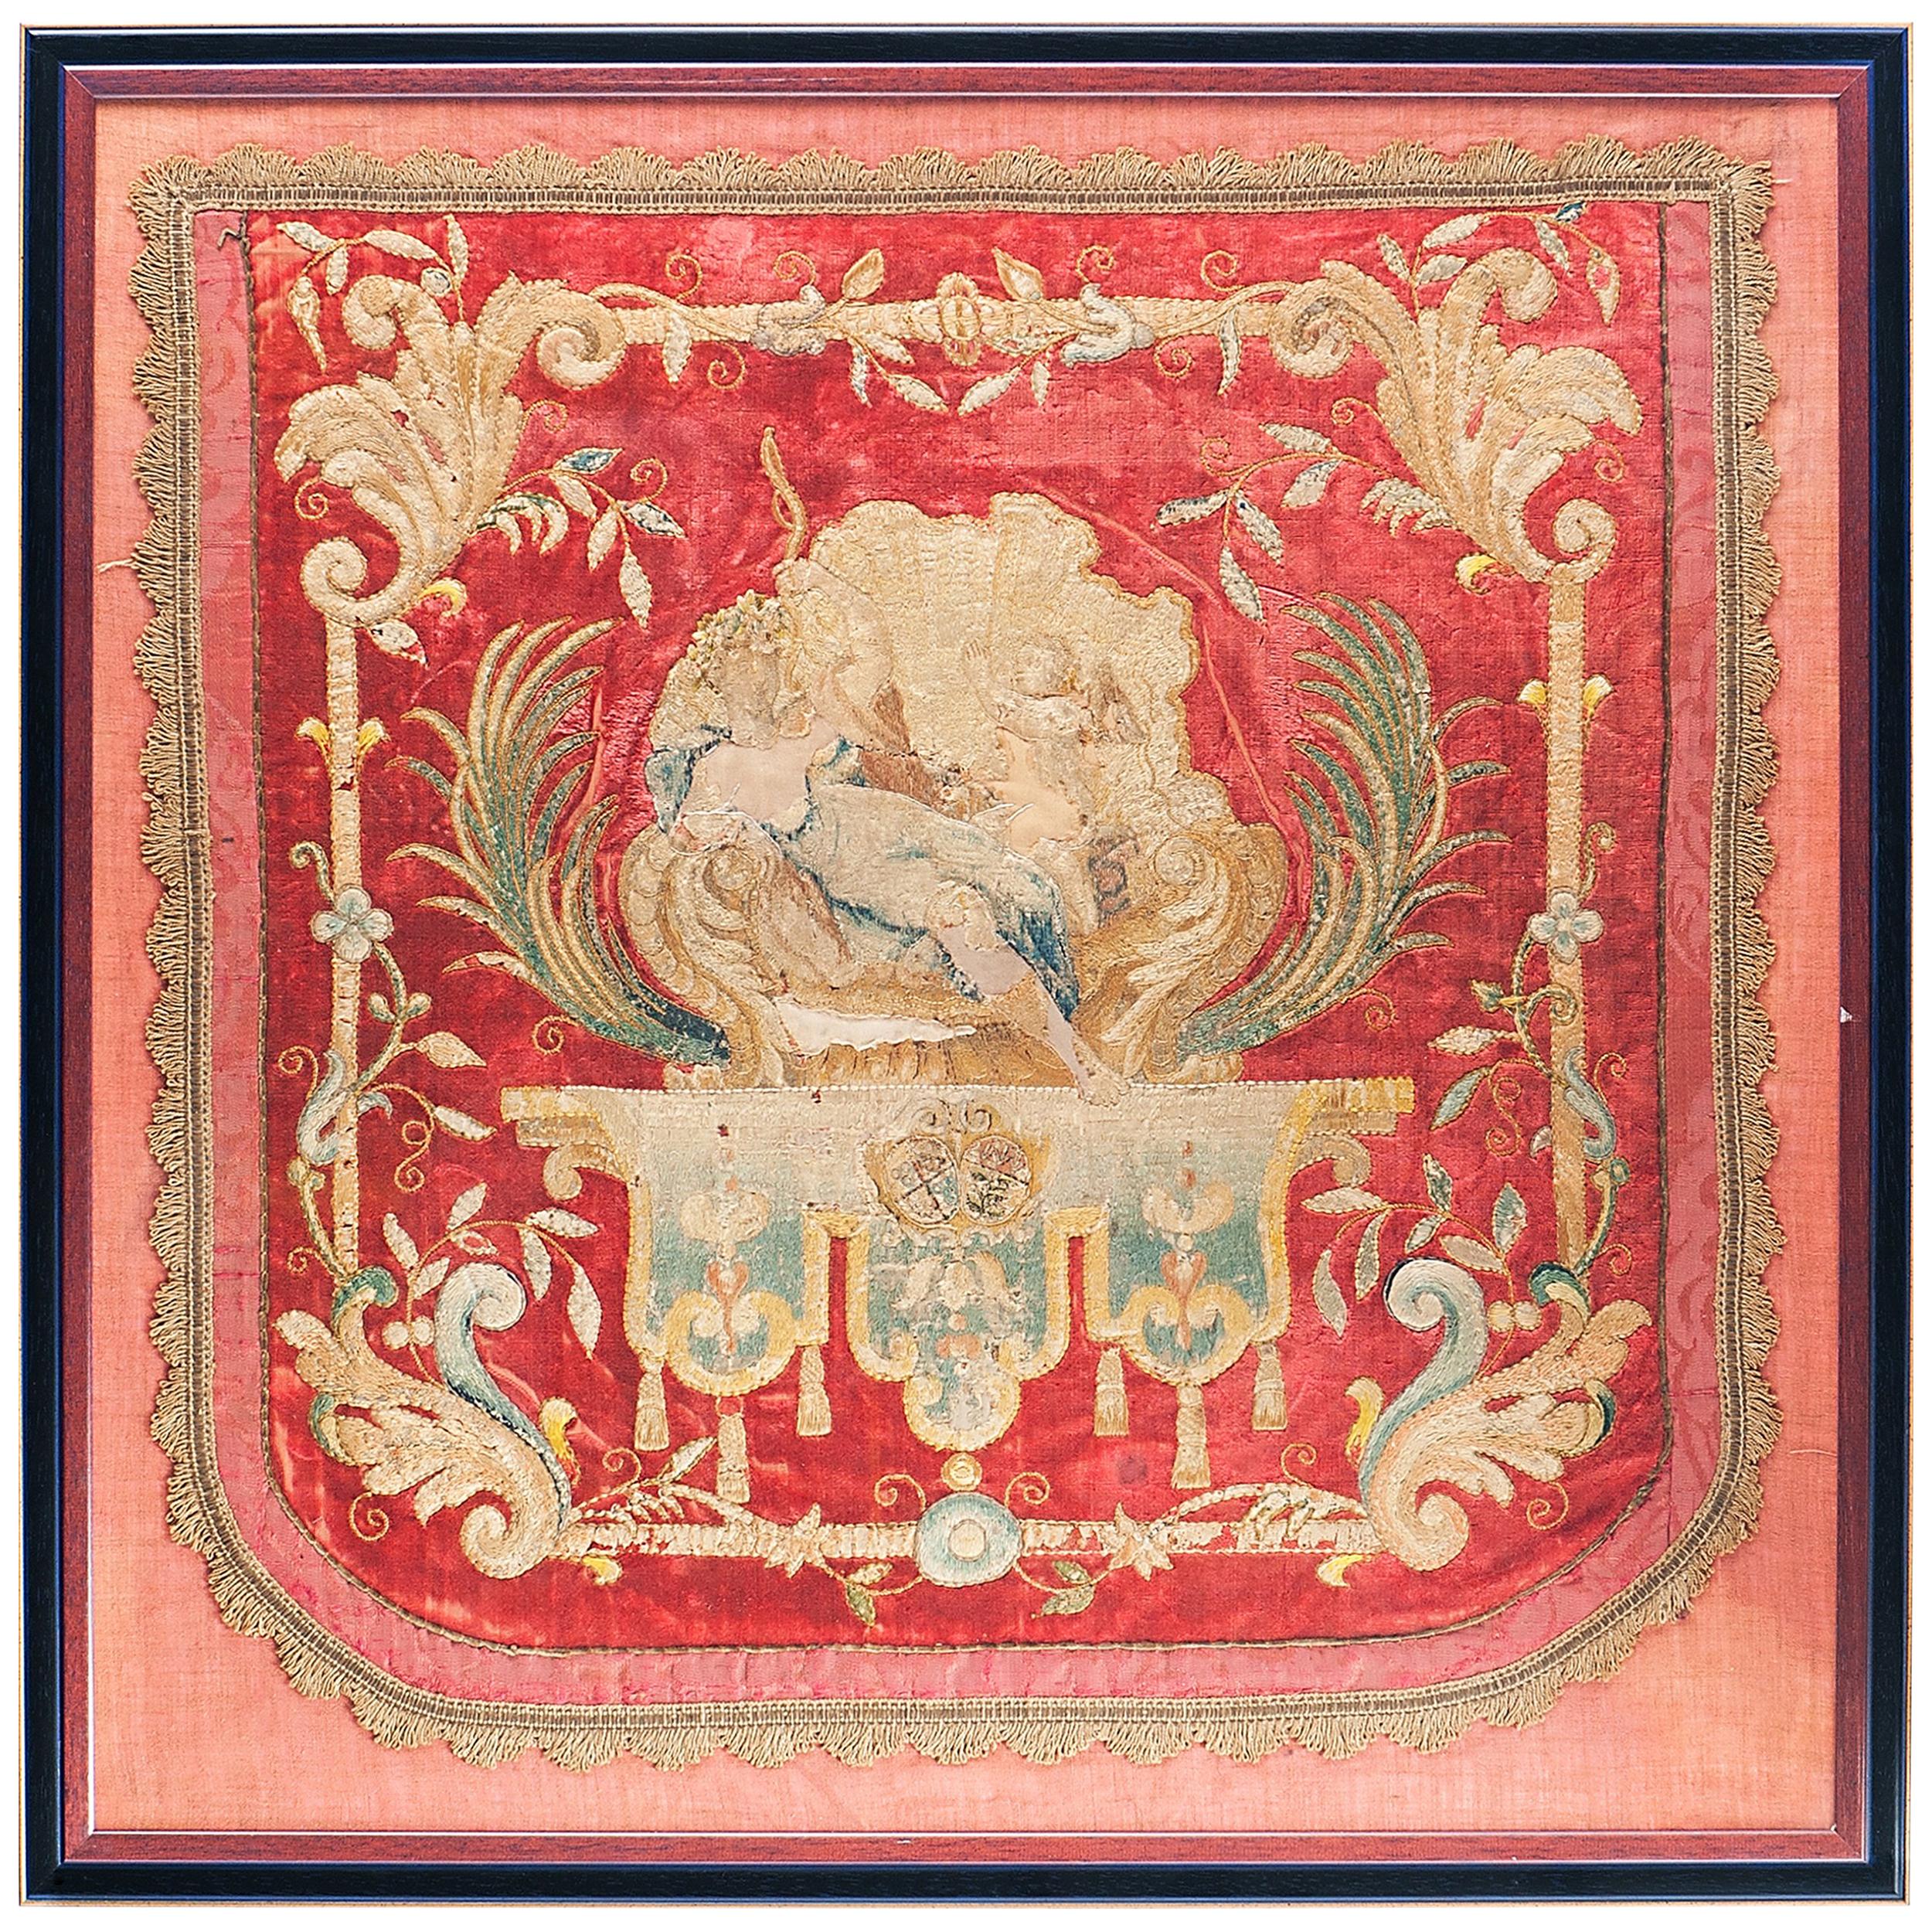 Louis XIV Embroidery Panel with Venus and Amor and Two Coat-of-Arms For Sale